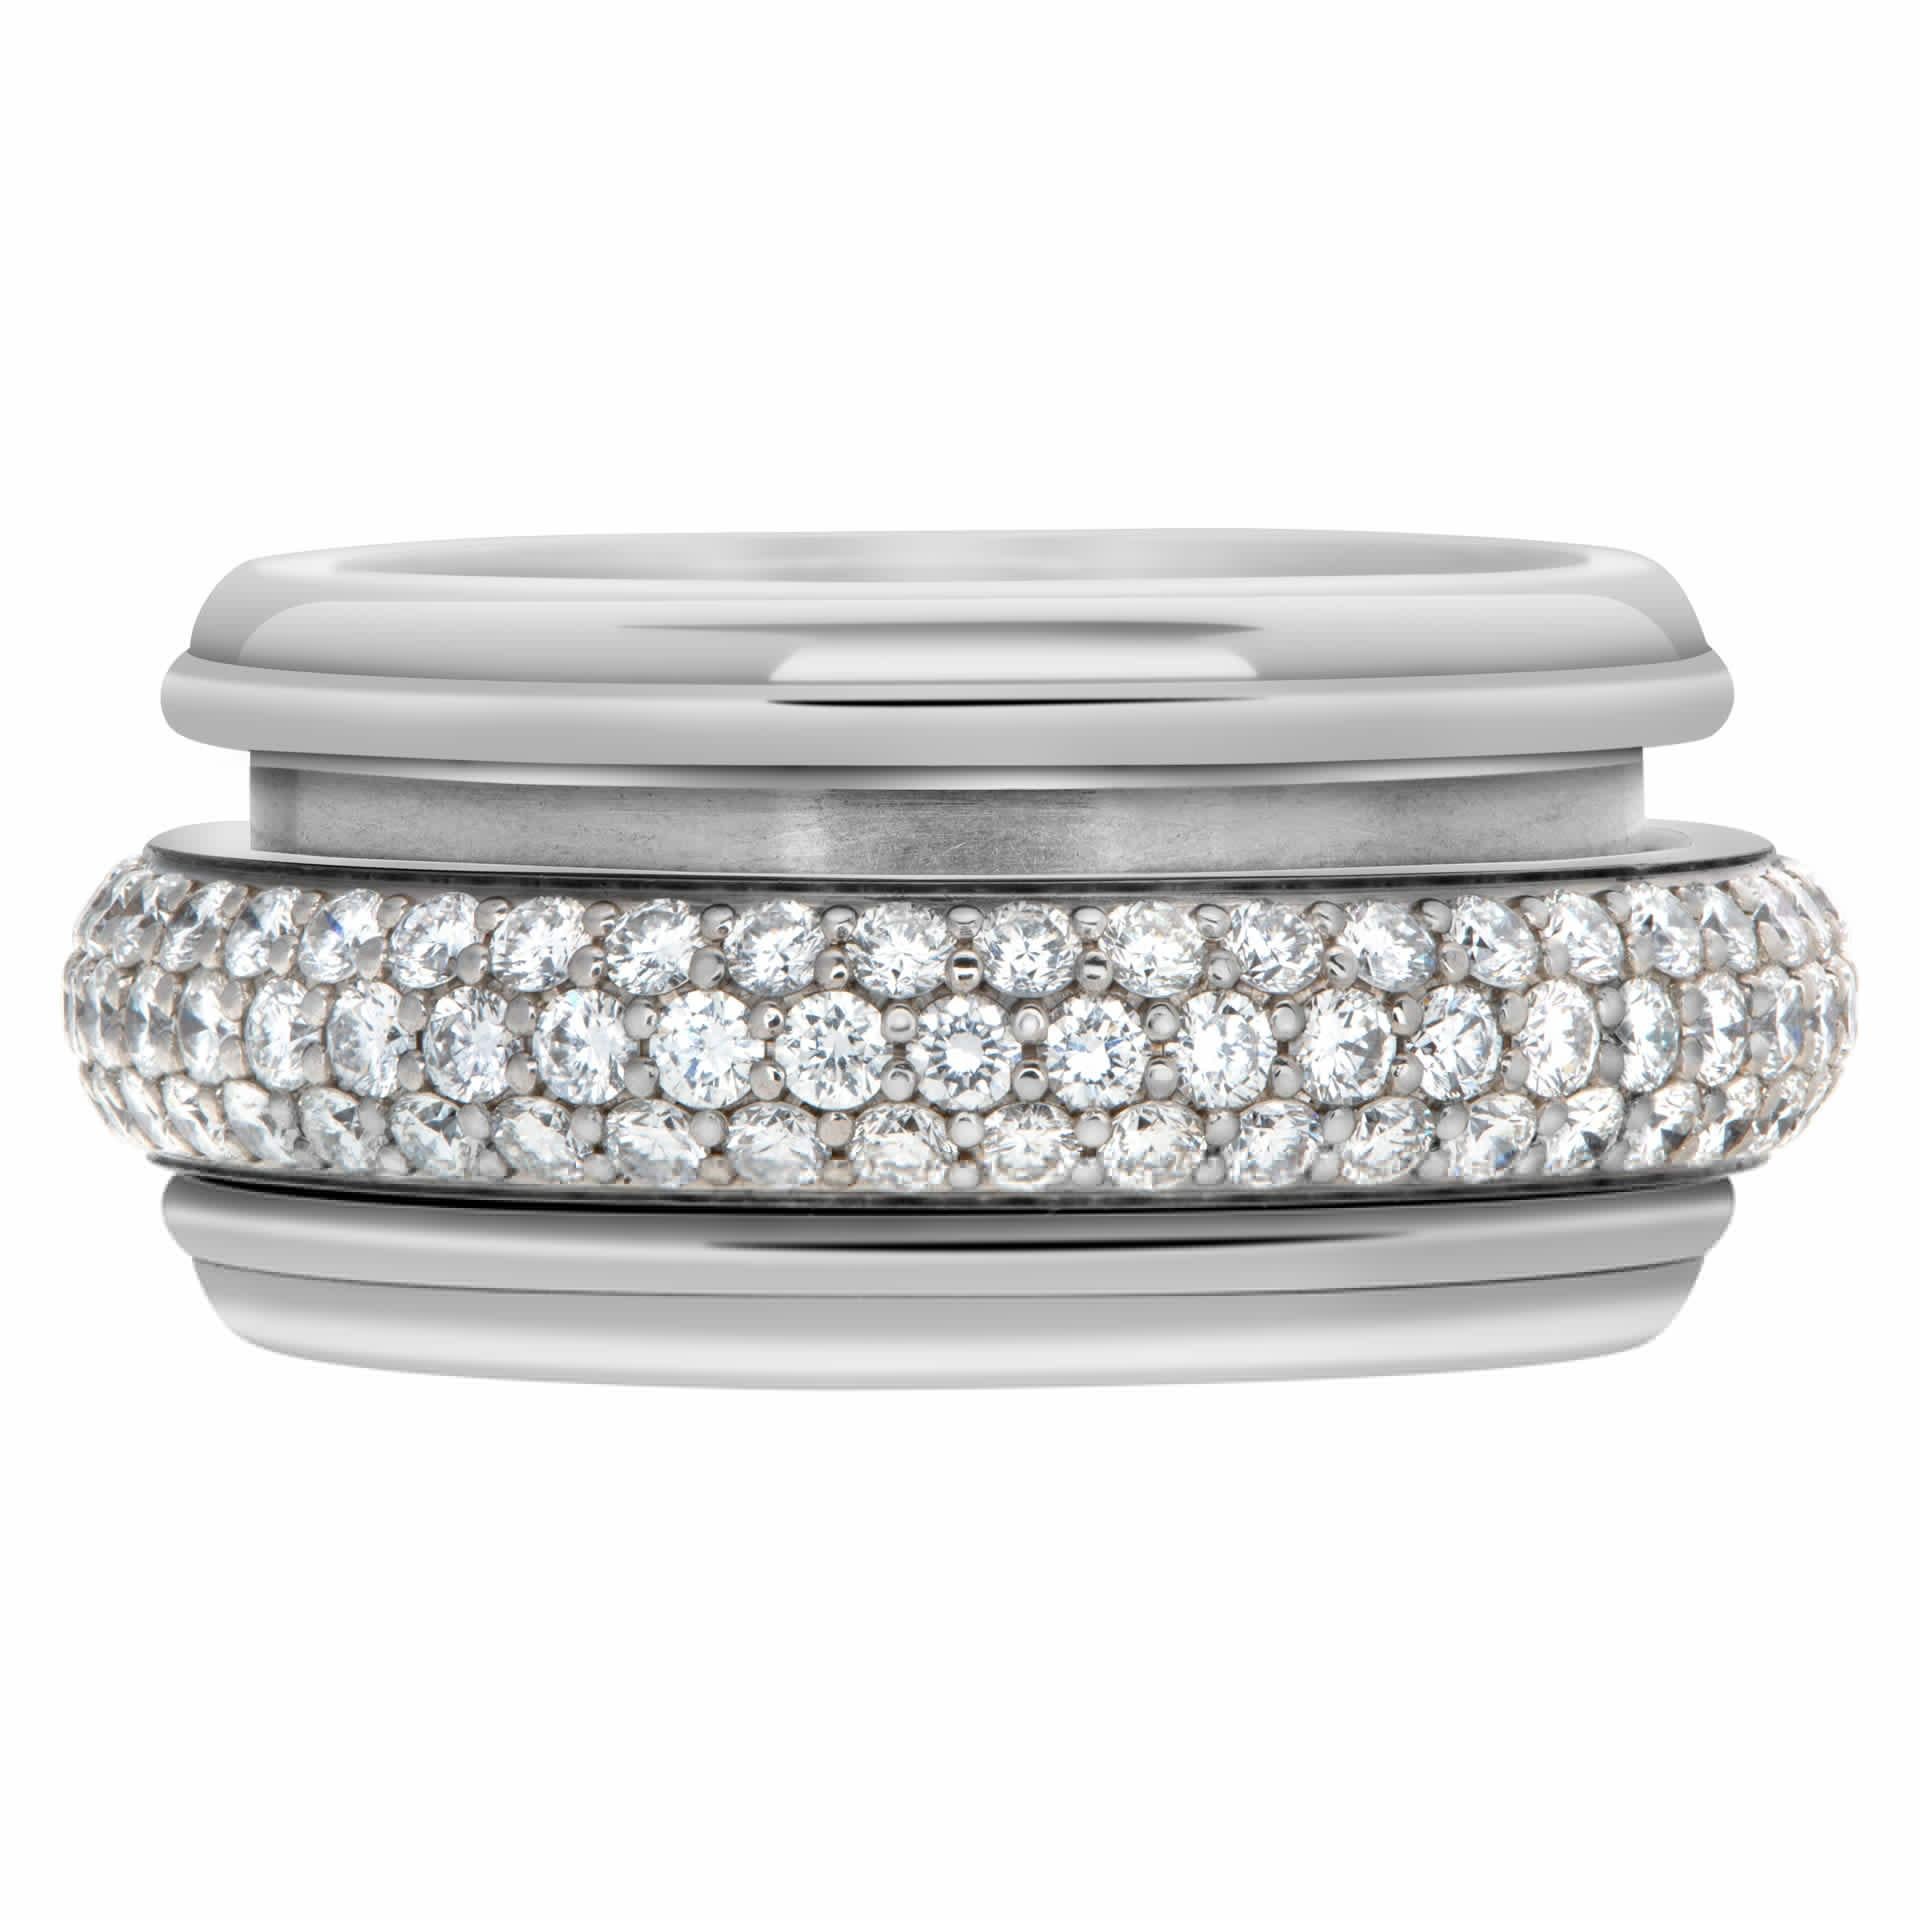 Piaget diamond eternity band Possession Bandeau in 18k white gold with 128 diamonds totaling approximately 2 carats. Size 6.
